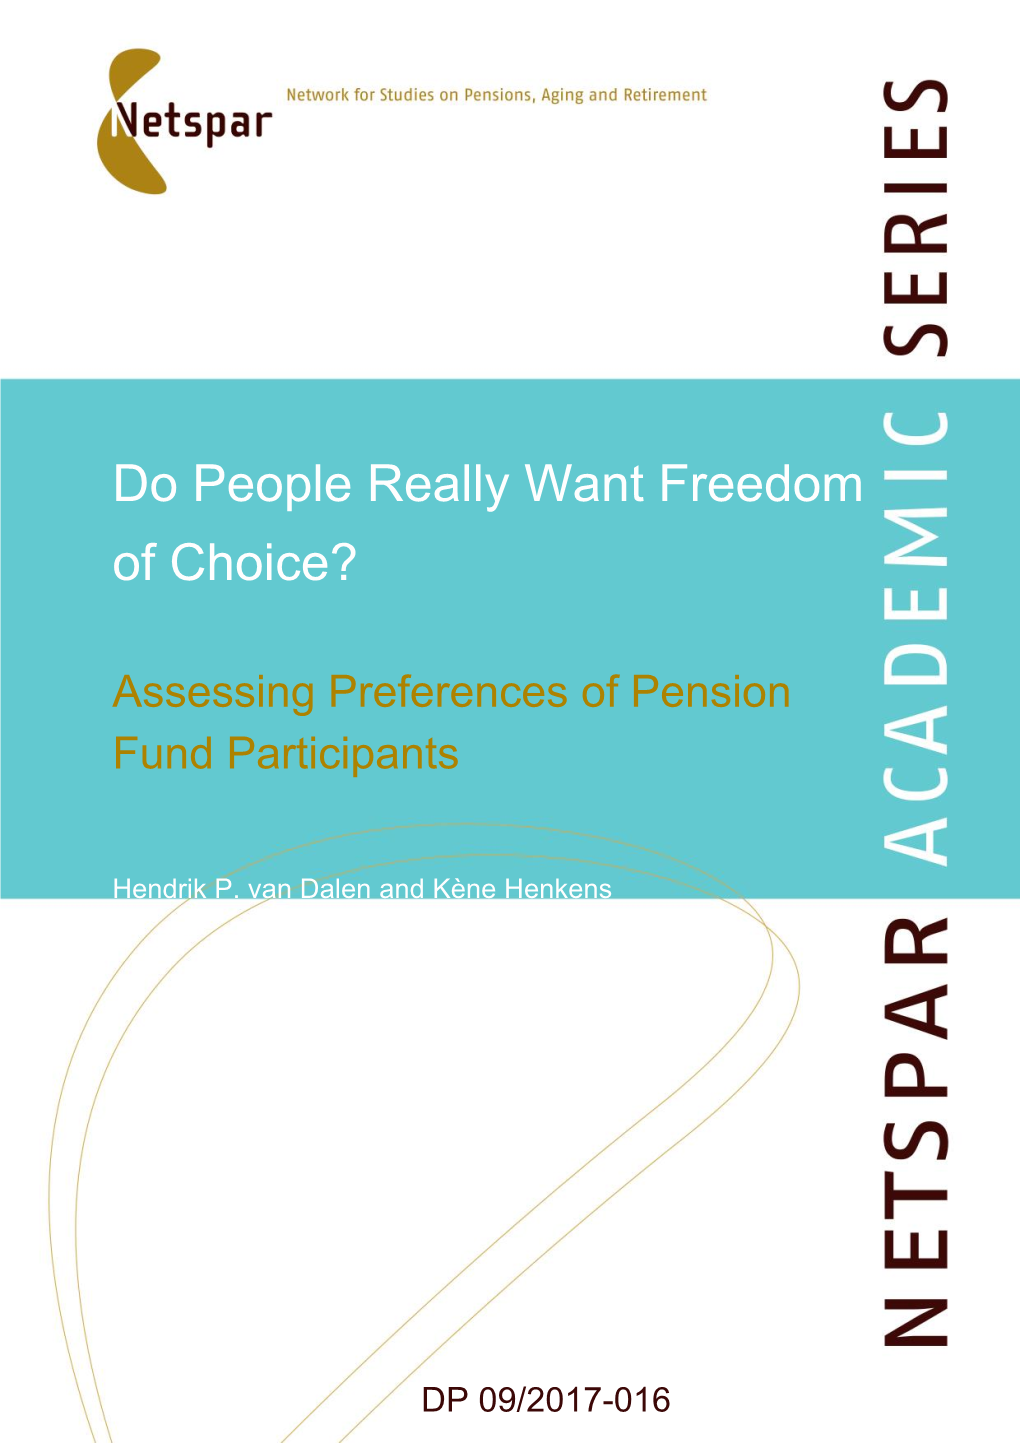 Do People Really Want Freedom of Choice?